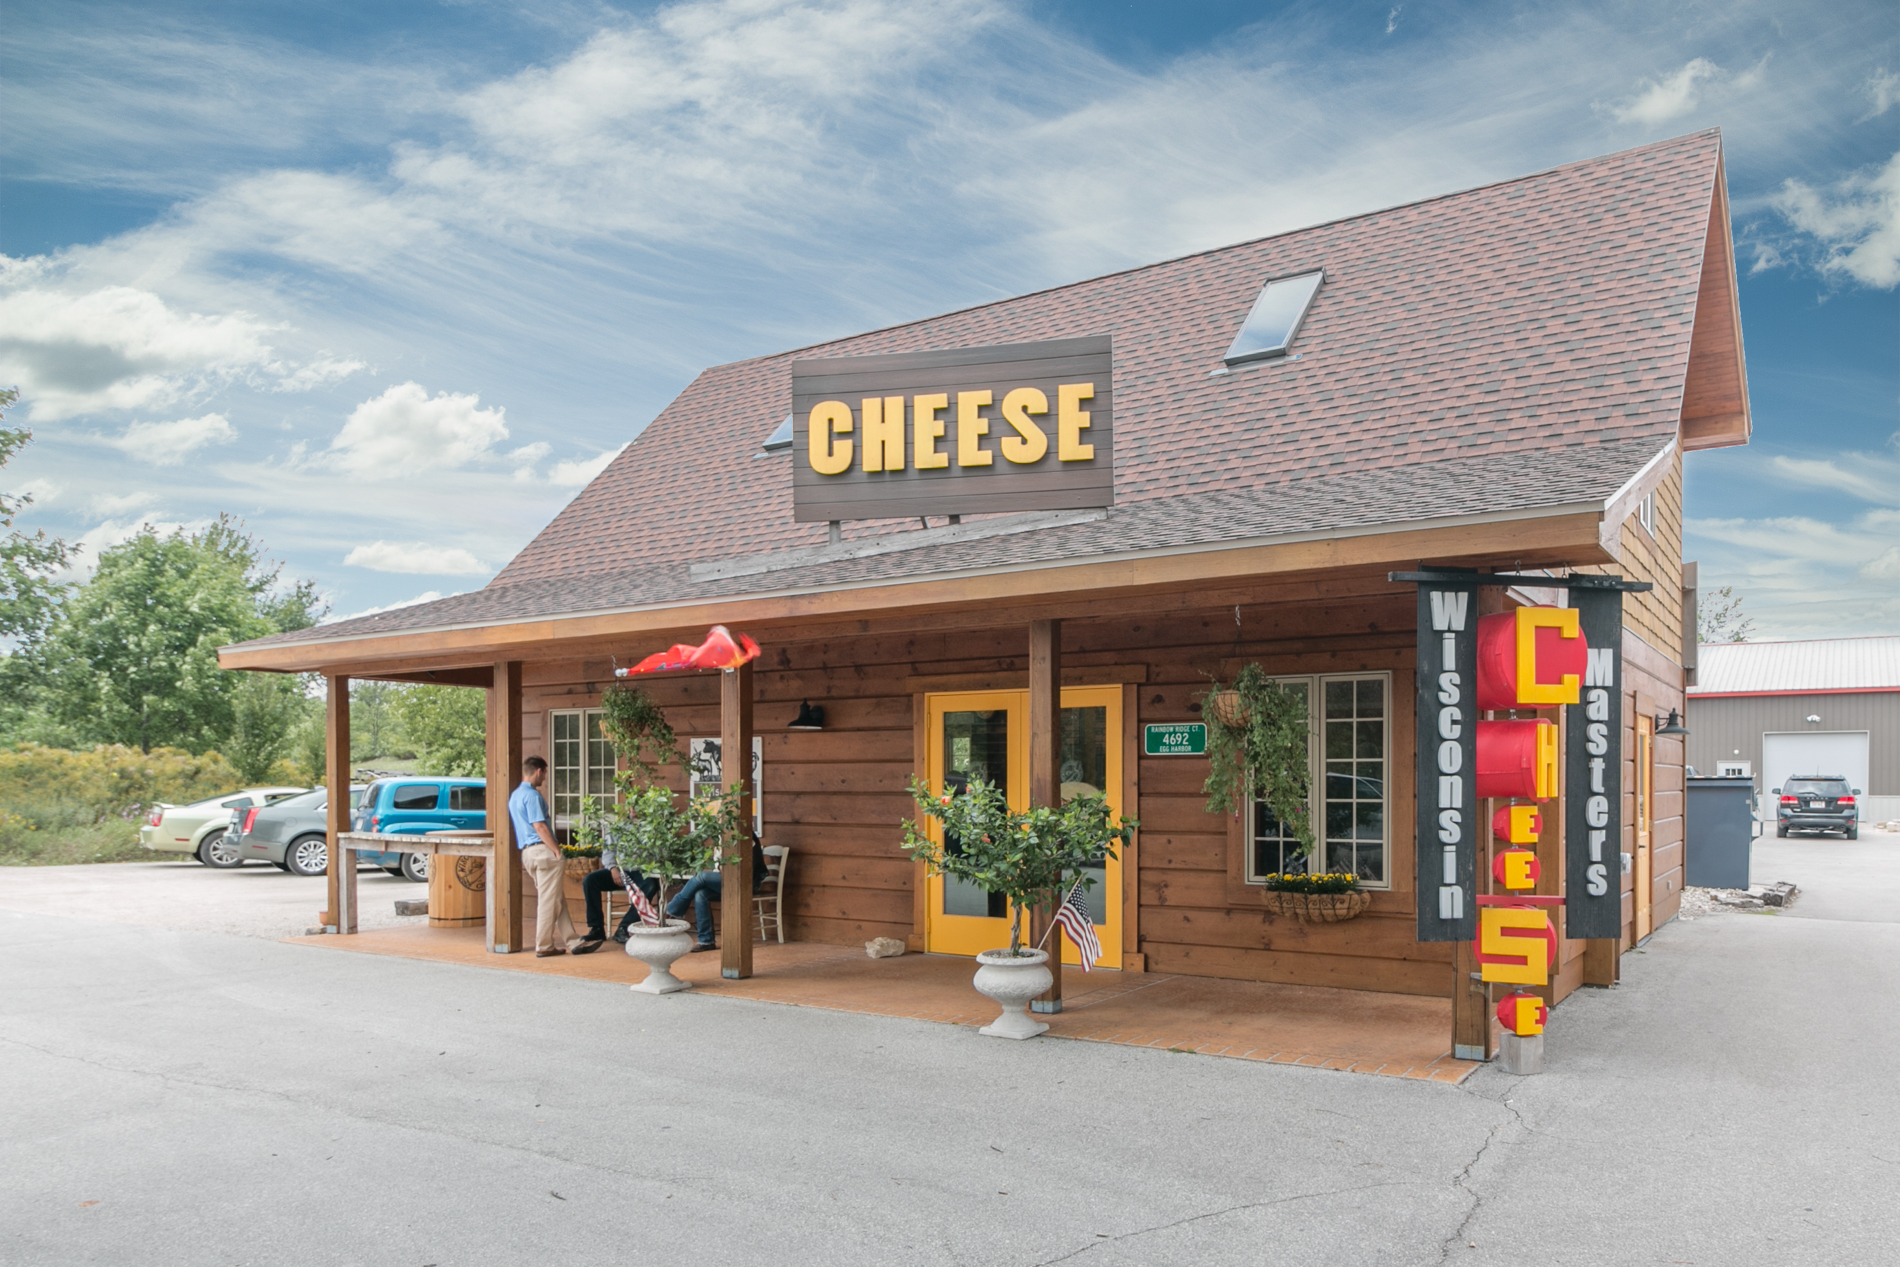   The only thing better than Wine is Wine and Cheese!&nbsp; And not just any cheese.&nbsp; &nbsp;30 steps outside Harbor Ridge Winery is the home of Wisconsin Cheese Masters, where one can taste a wide array of award winning artisan cheeses – all pro